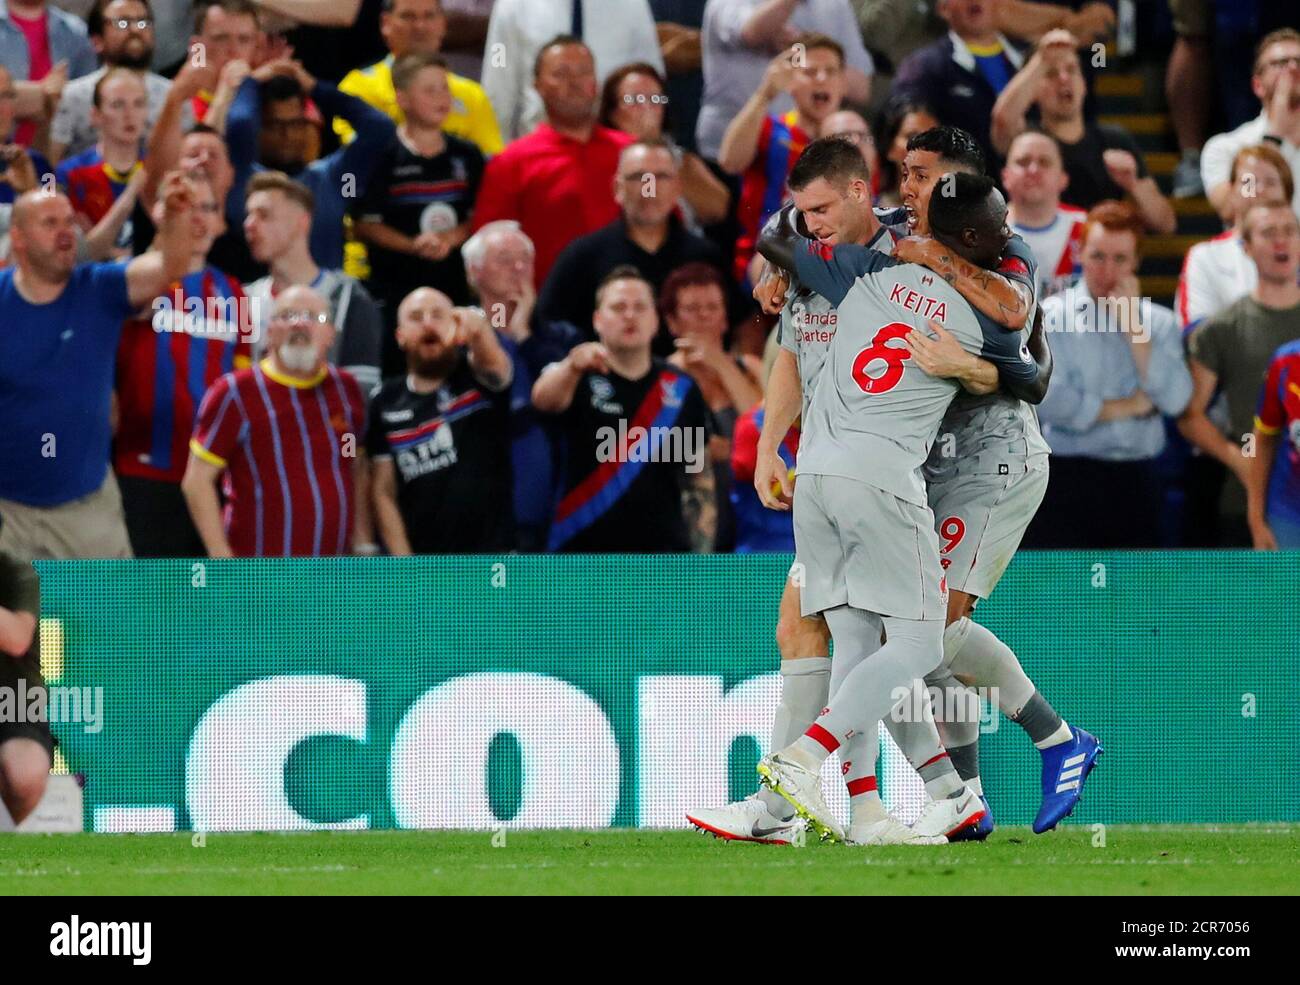 Soccer Football - Premier League - Crystal Palace v Liverpool - Selhurst Park, London, Britain - August 20, 2018  Liverpool's James Milner celebrates scoring their first goal from the penalty spot with Naby Keita and Roberto Firmino                   REUTERS/Eddie Keogh  EDITORIAL USE ONLY. No use with unauthorized audio, video, data, fixture lists, club/league logos or "live" services. Online in-match use limited to 75 images, no video emulation. No use in betting, games or single club/league/player publications.  Please contact your account representative for further details. Stock Photo